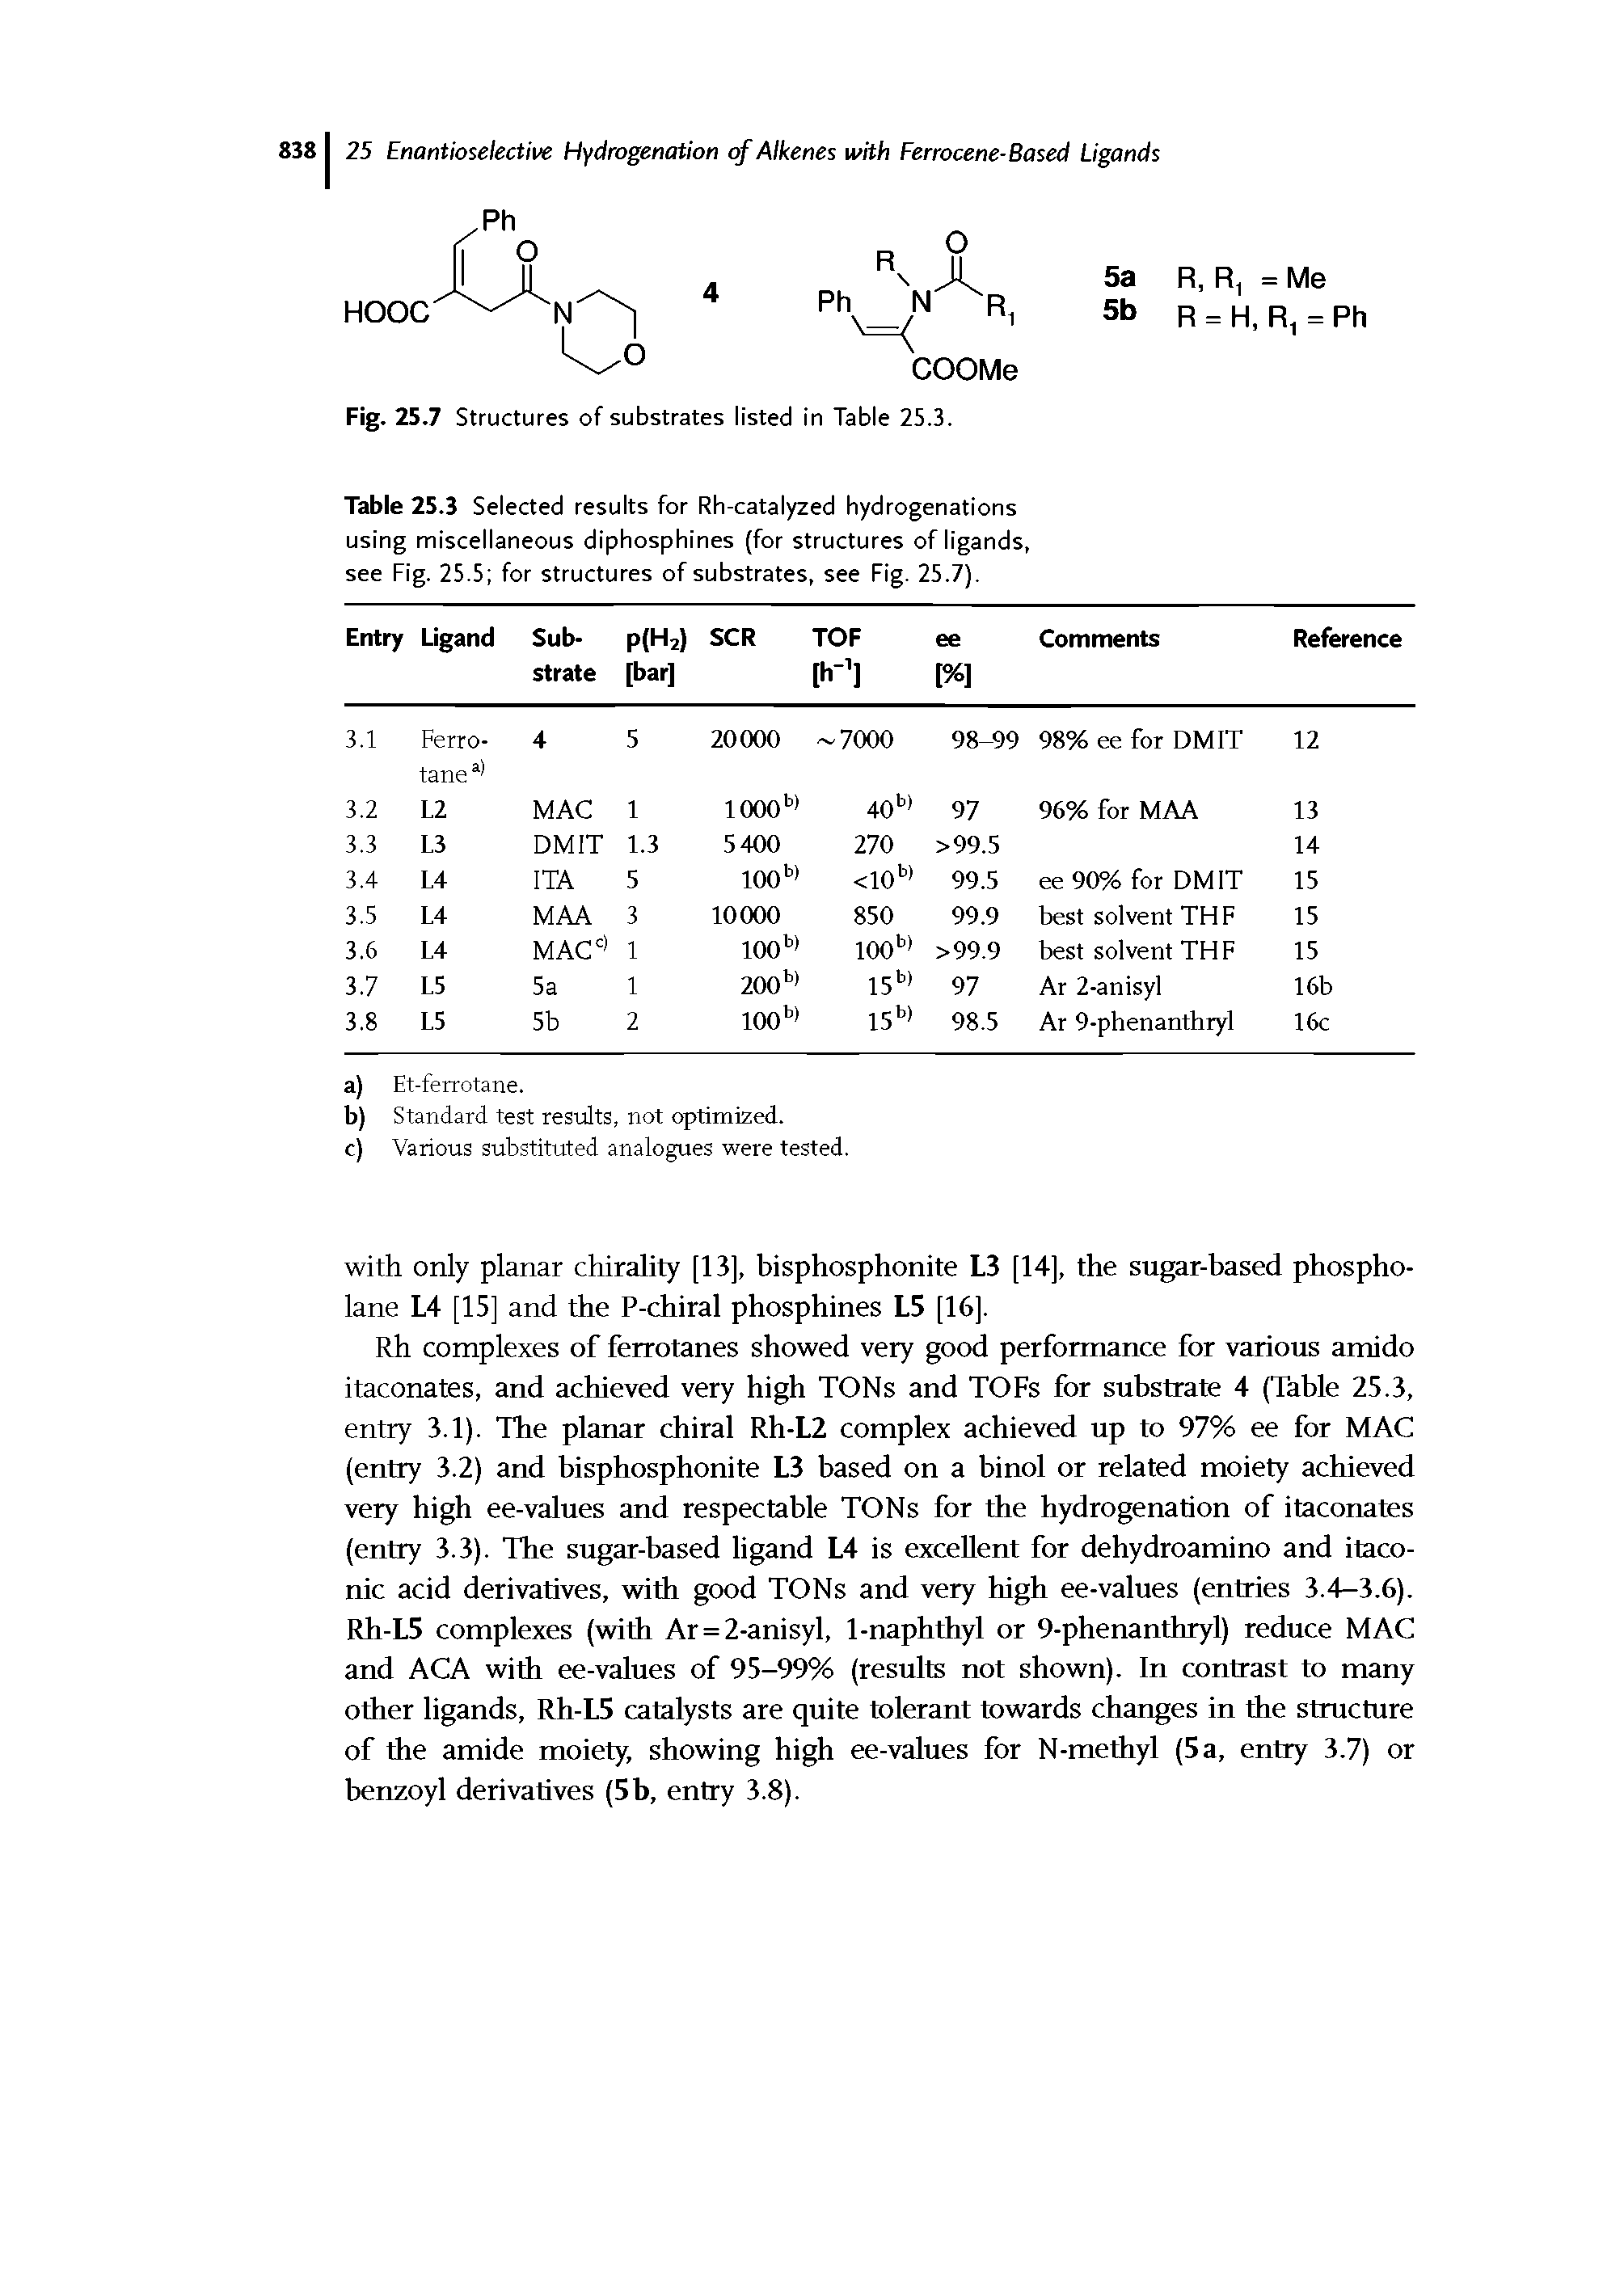 Table 25.3 Selected results for Rh-catalyzed hydrogenations using miscellaneous diphosphines (for structures of ligands, see Fig. 25.5 for structures of substrates, see Fig. 25.7).